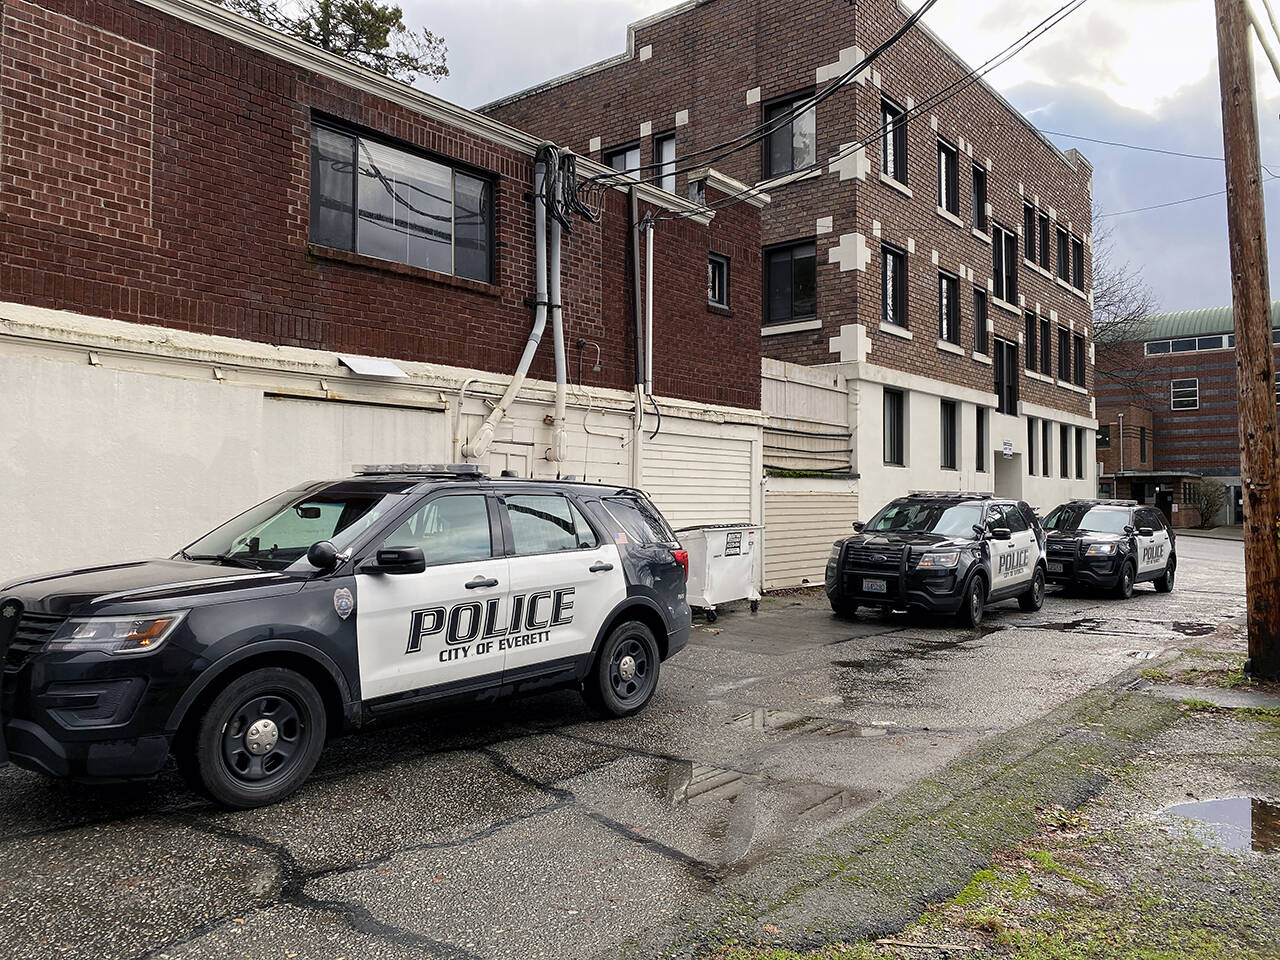 Everett police respond to a situation in an alley between Colby and Rucker avenues on Saturday. The city passed a budget that would provide for eight more police officers to be funded initially by a federal Department of Justice COPS grant. (Sue Misao / The Herald)